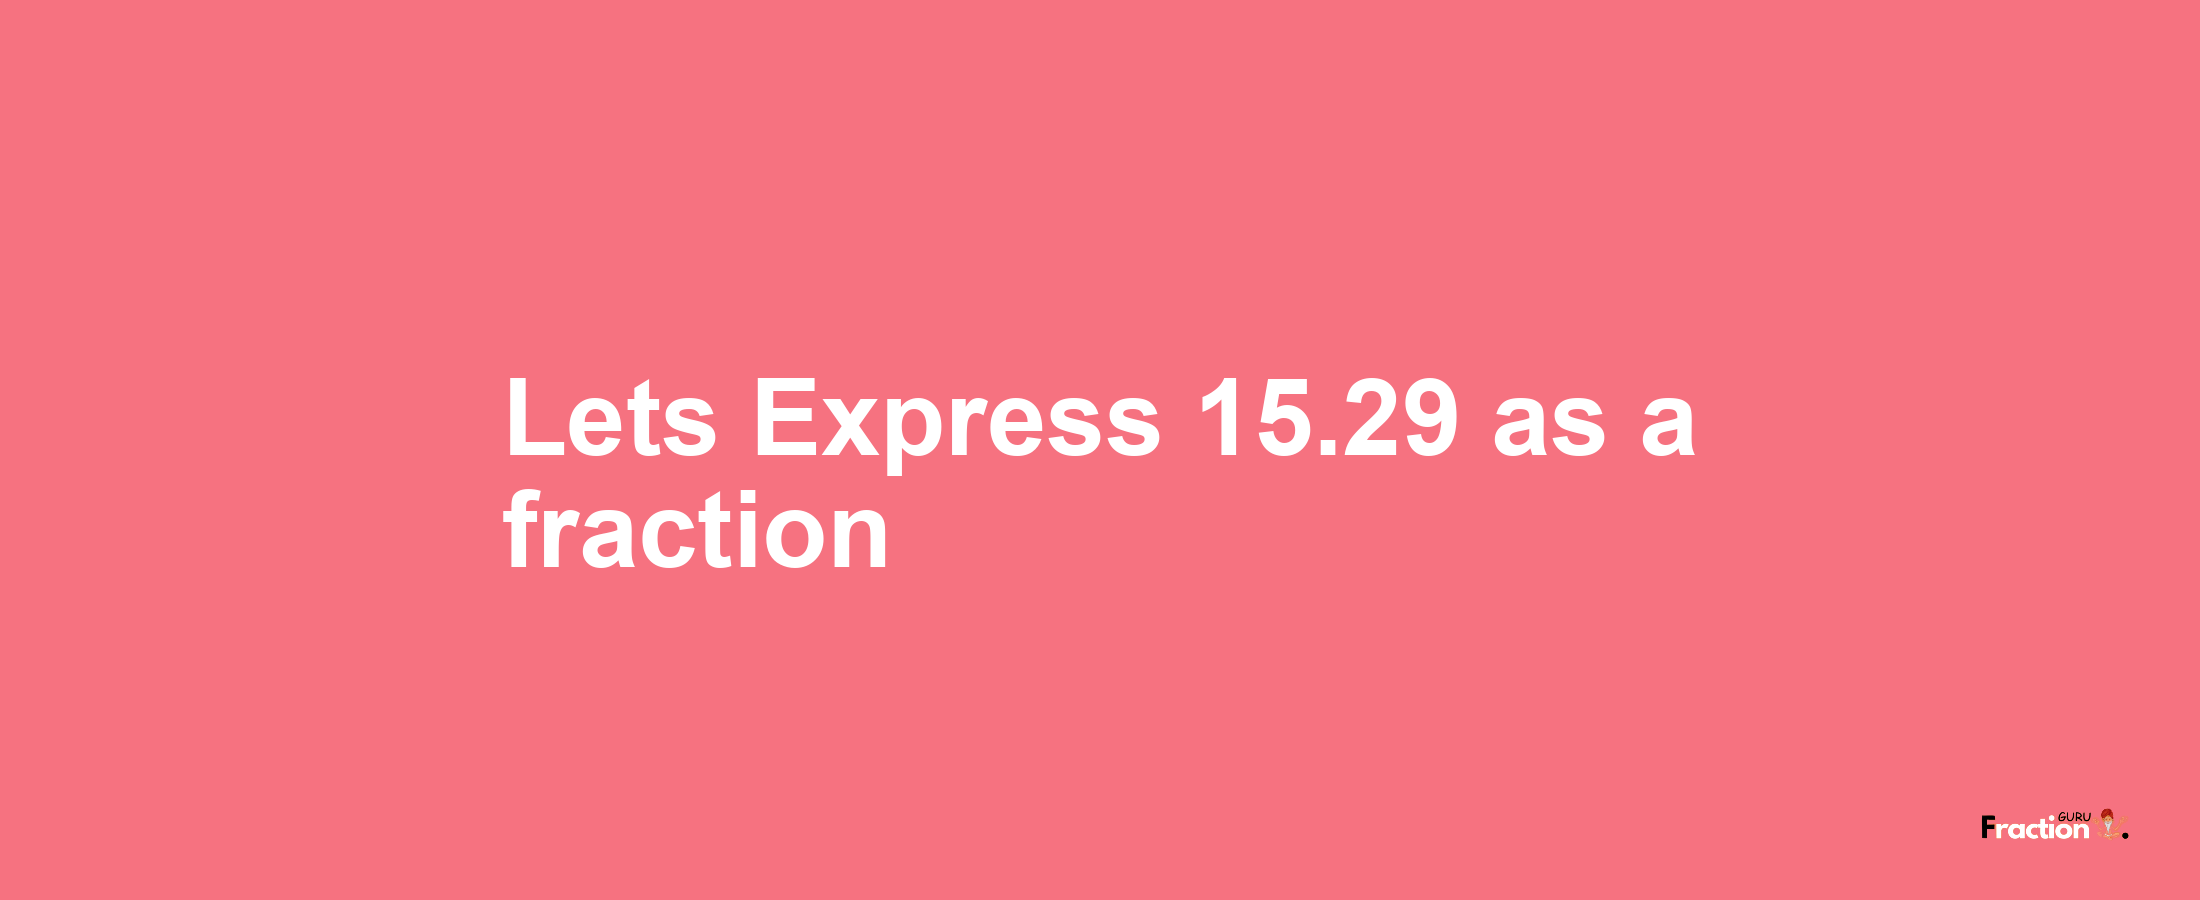 Lets Express 15.29 as afraction